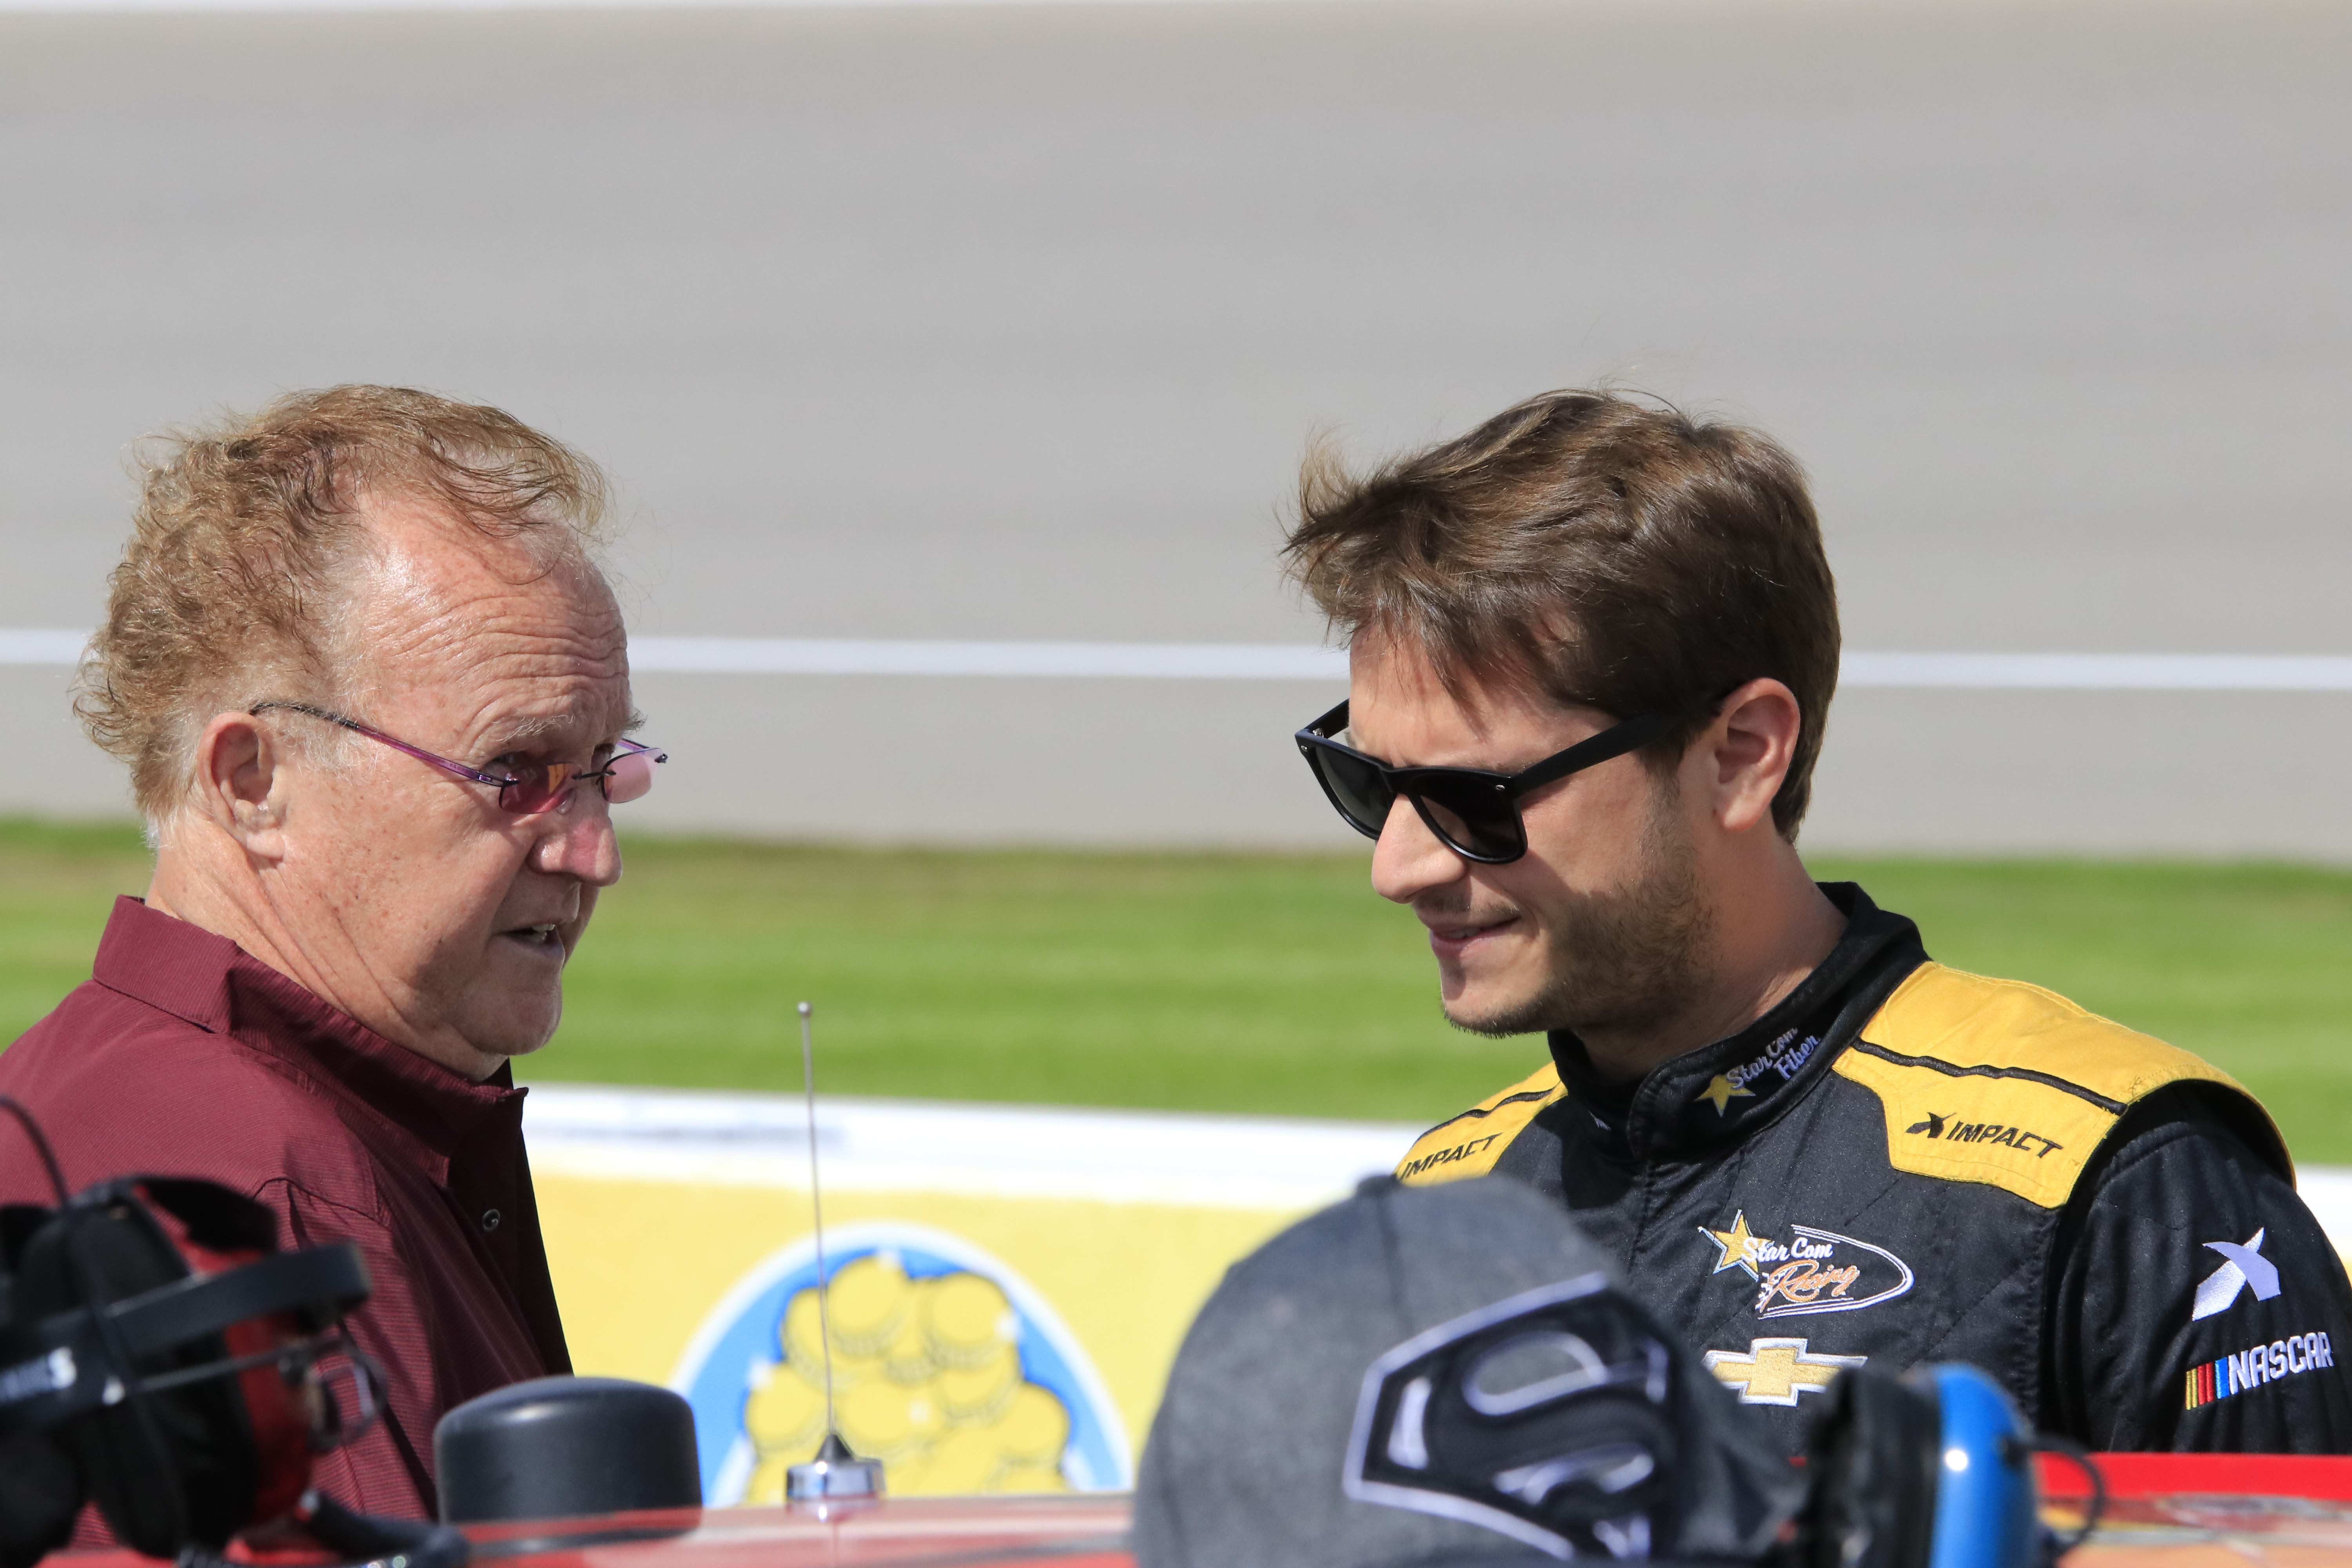 In particular, Cassill enjoys helping out Morgan Shepherd's racing team. (Photo Credit: Stephen Conley/TPF)